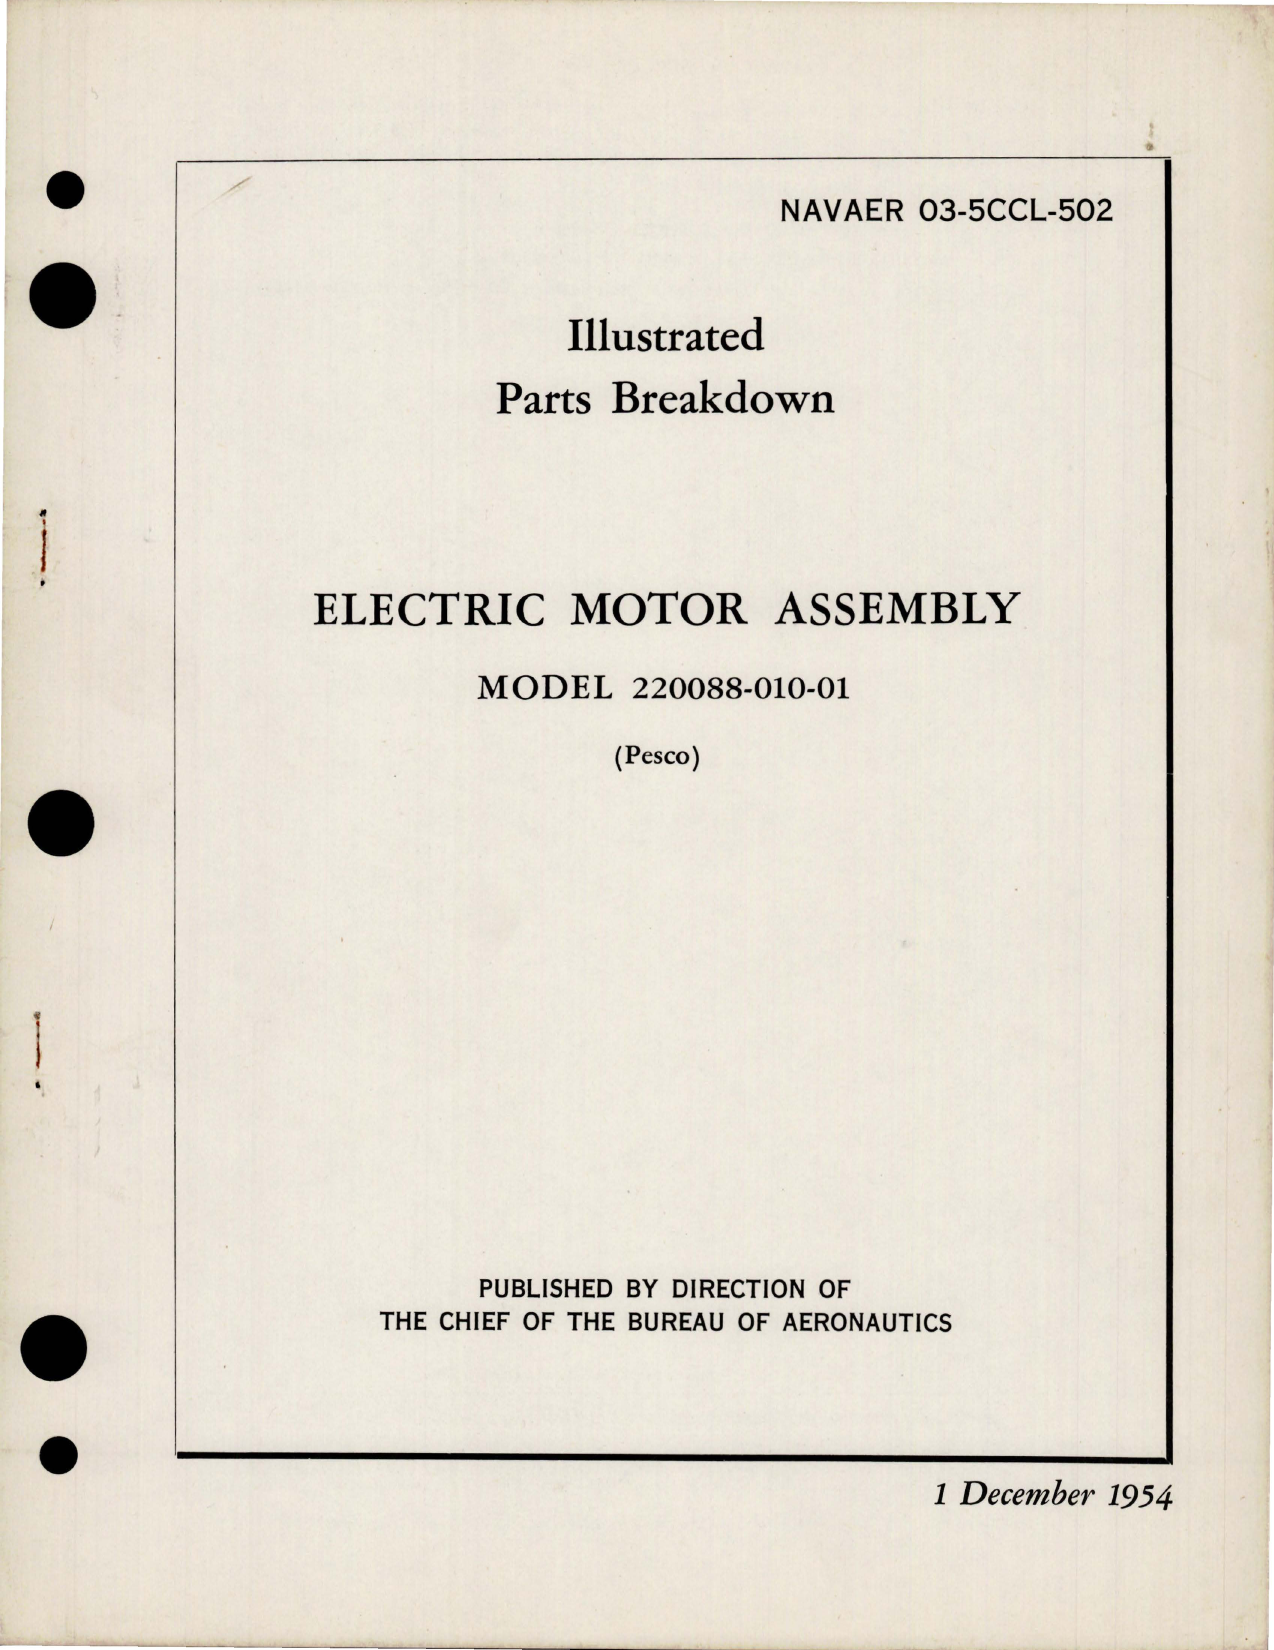 Sample page 1 from AirCorps Library document: Parts Breakdown for Electric Motor Assembly - Model 220088-010-01